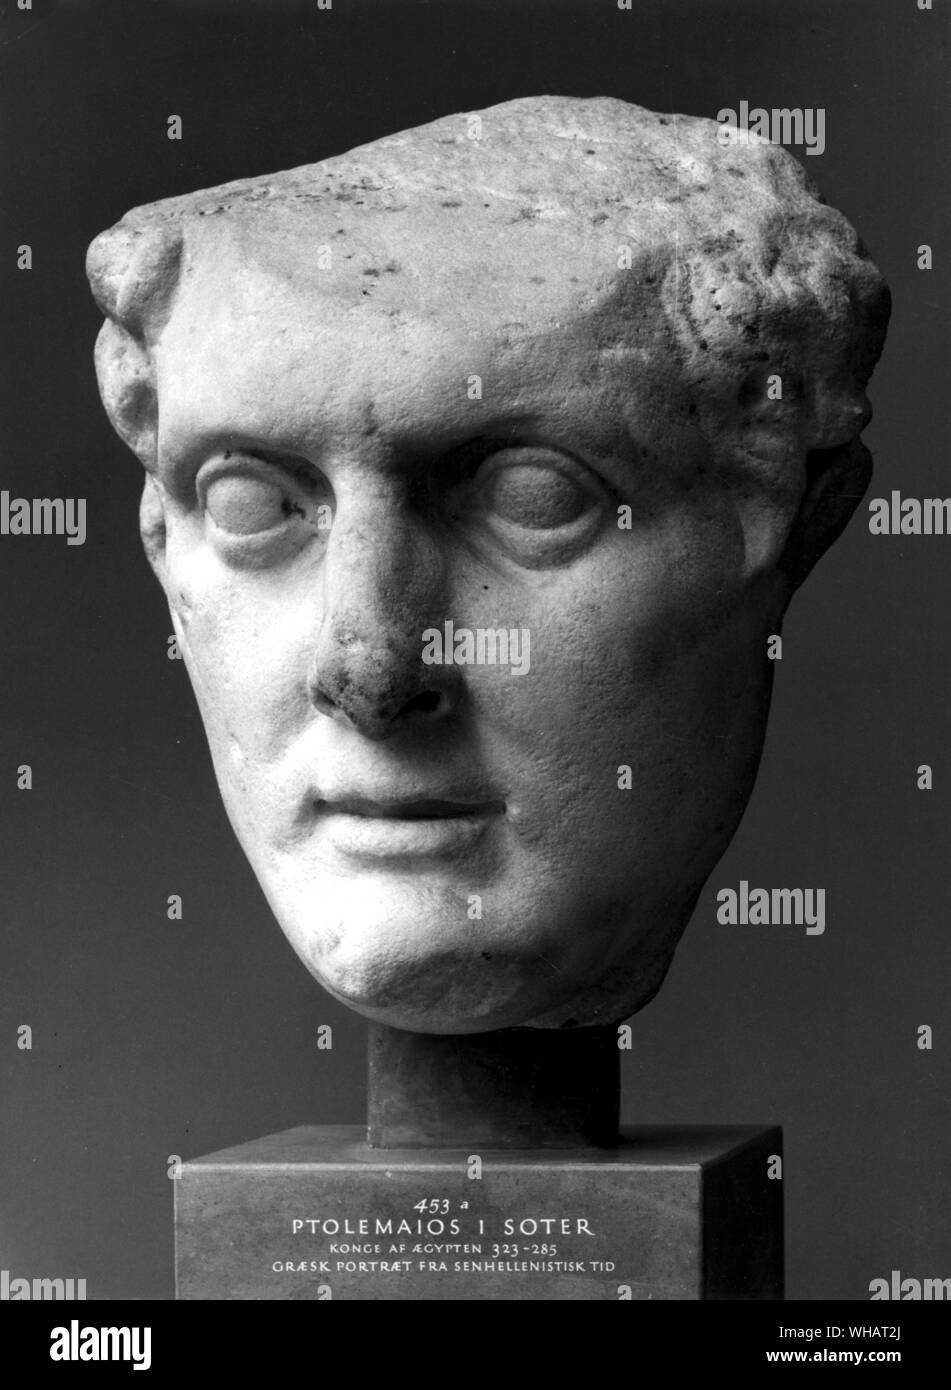 Ptolemy. Marble head of Ptolemy I Soter, 304-282 BC, said to be